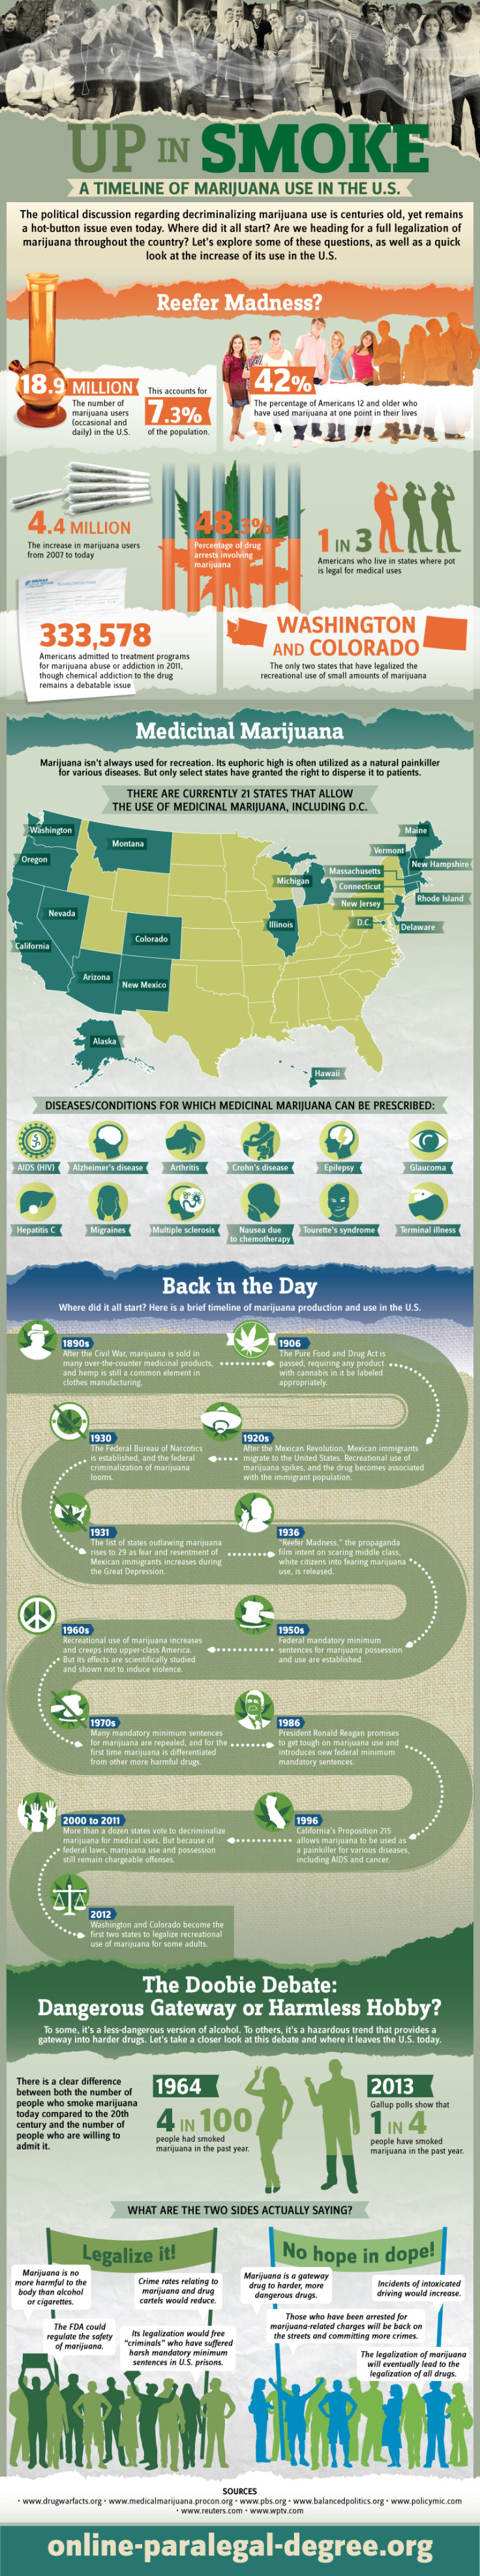 Up in Smoke: A Timeline of Marijuana Use in the U.S.